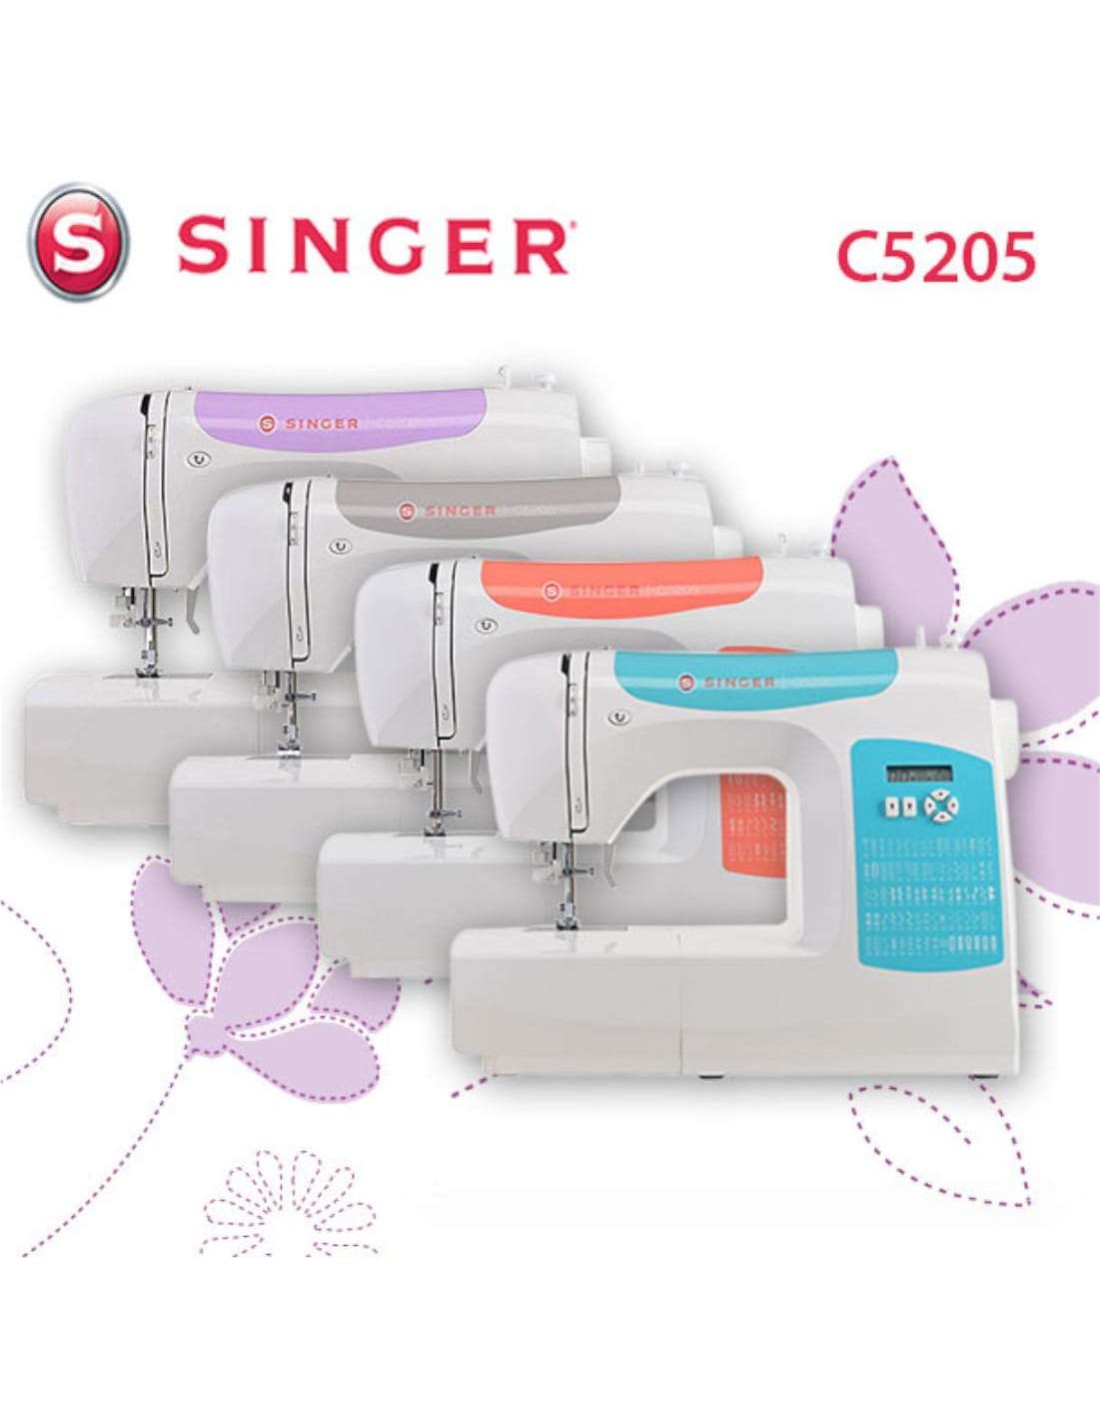 Sewing Computerized C5205 Machine Singer